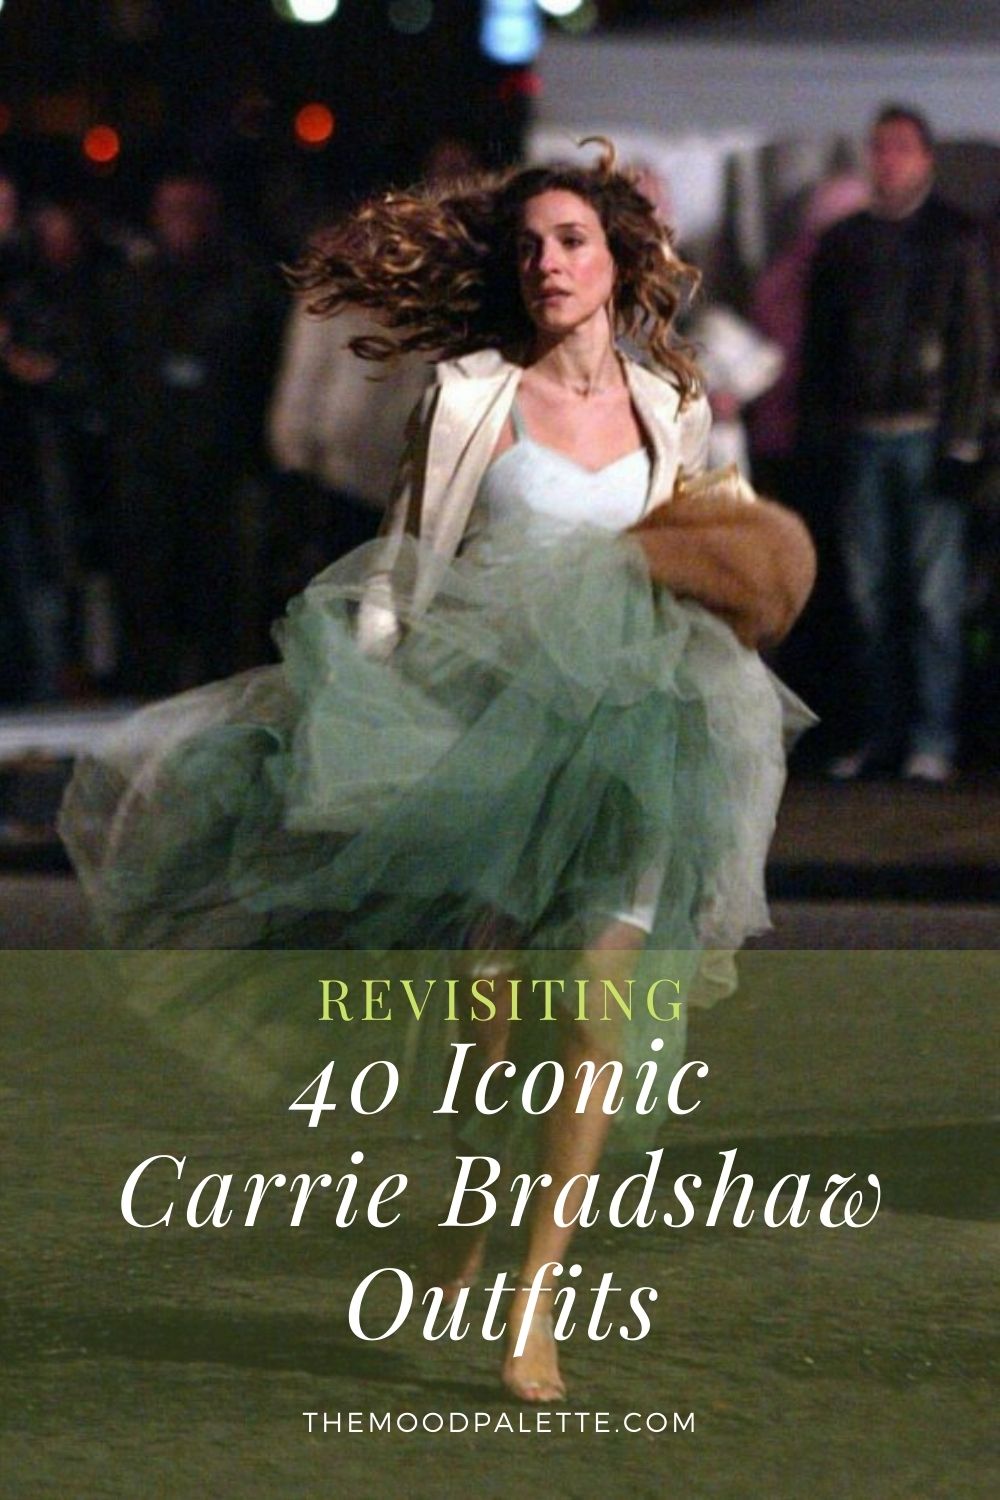 You are currently viewing Revisiting 40 Iconic Carrie Bradshaw Outfits